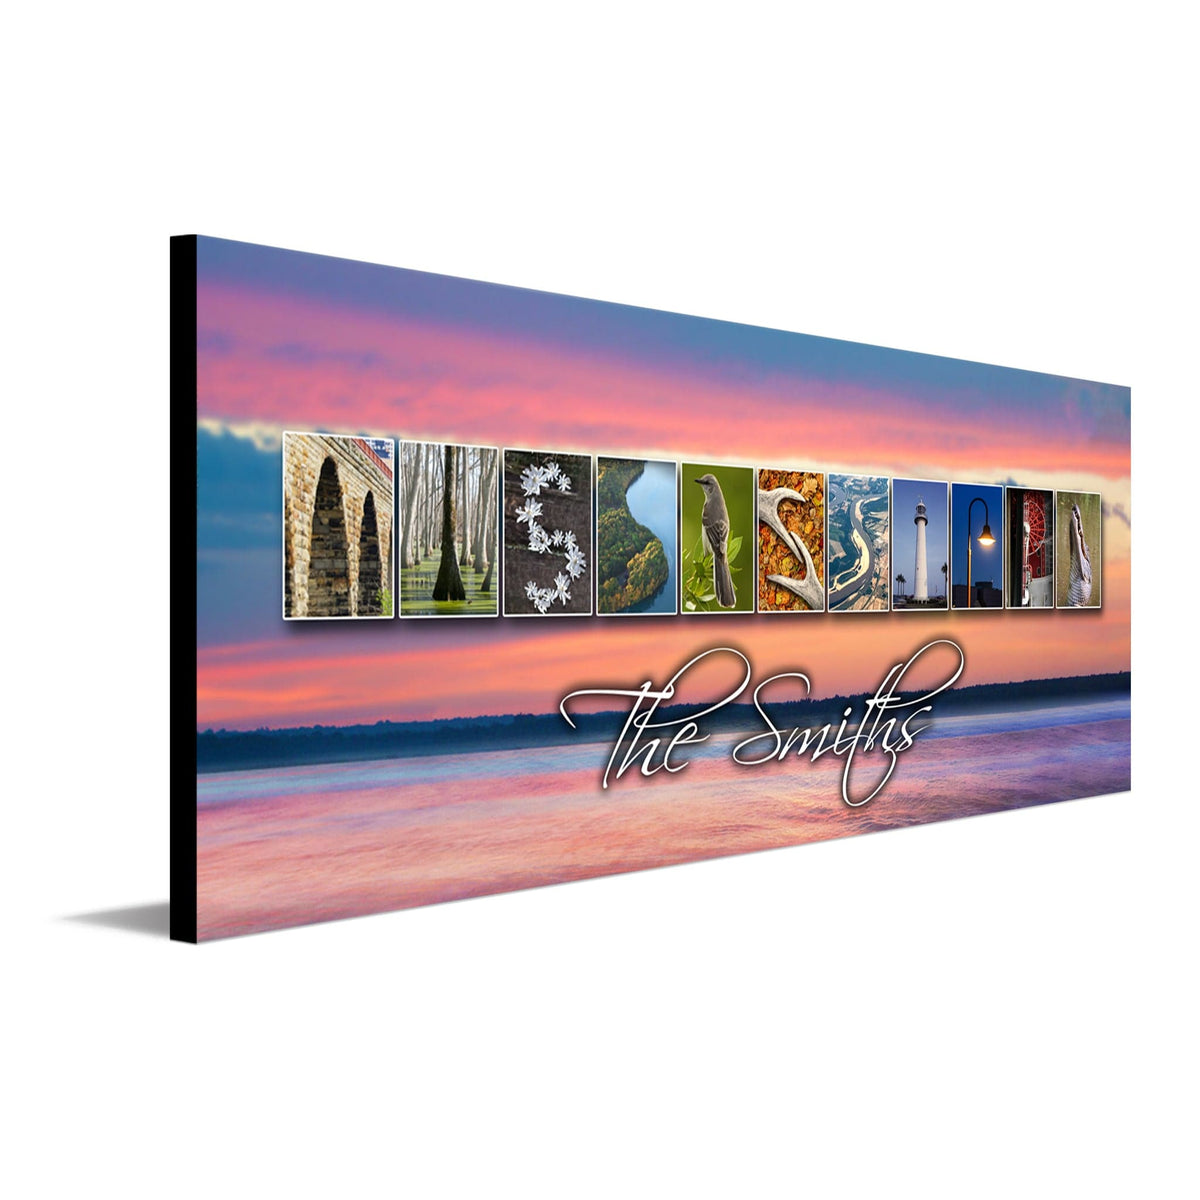 Mississippi art that uses images from the state to spell the word Mississippi - Personal-Prints